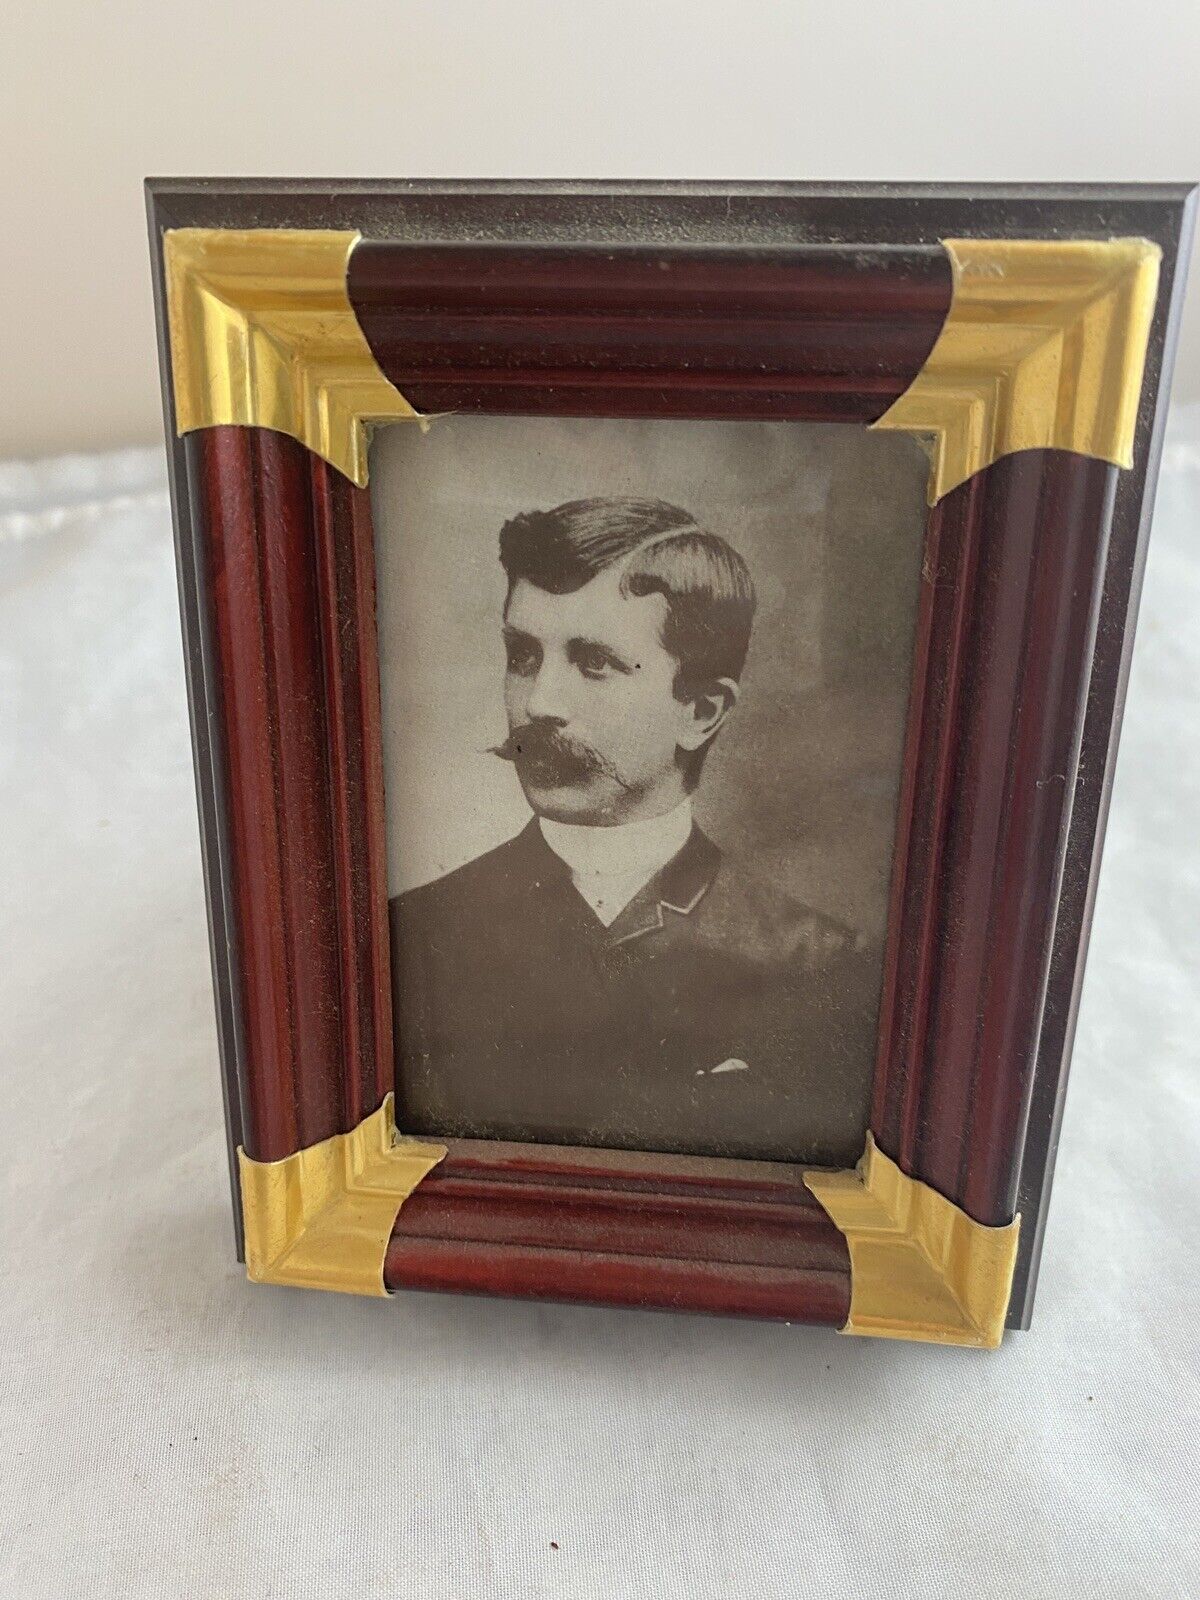 Antique 1900’s Man's Portrait in Cherry Wood & Gold Painted 4x3 Frame.